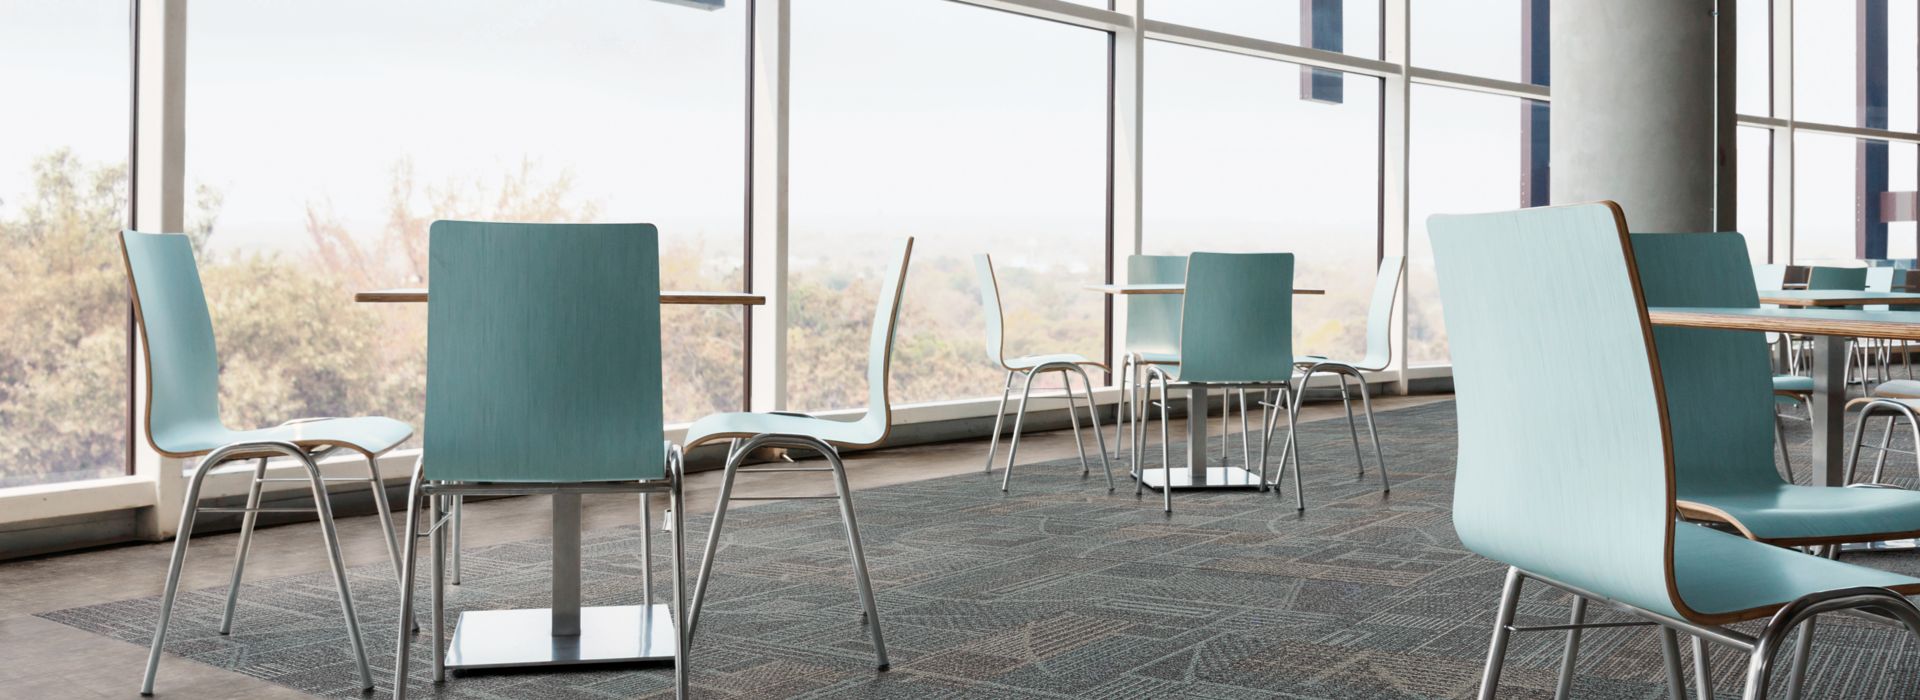 Interface Layout carpet tile and Textured Stones LVT in cafe area with teal colored chairs and natural light numéro d’image 1